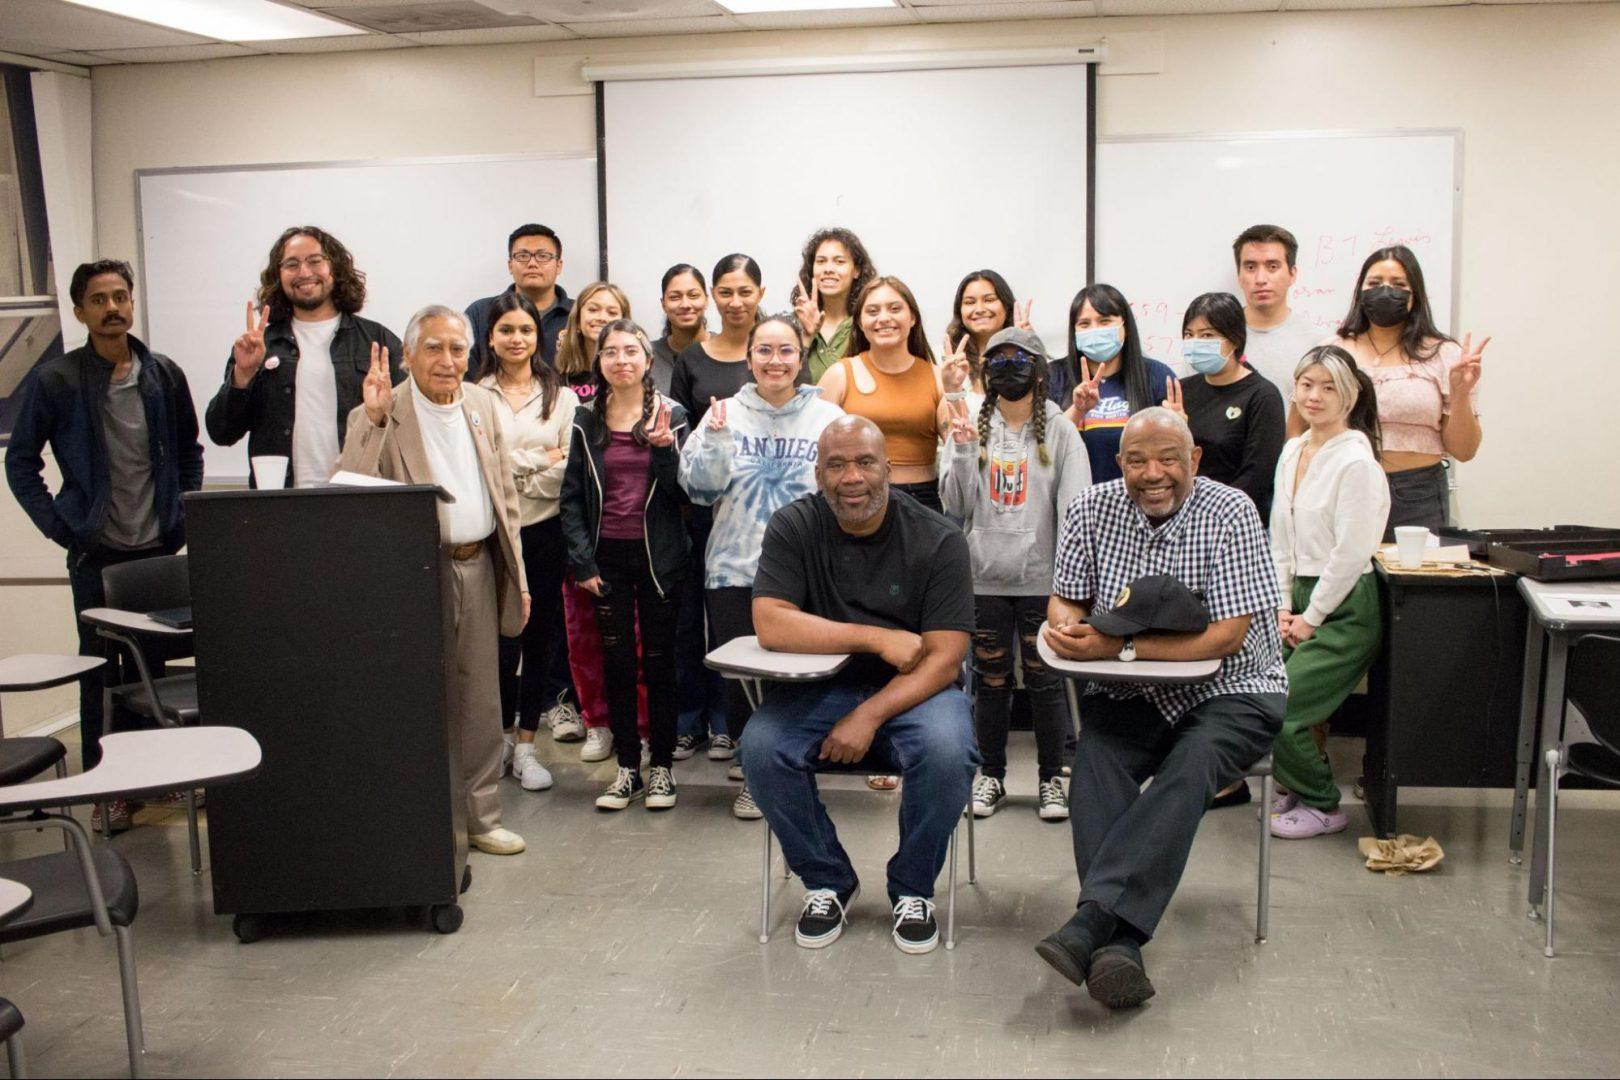 Fresno State professor Sudarshan Kapoor held a discussion in his classroom about gun violence on April 27, 2022. (Julia Espinoza/The Collegian)